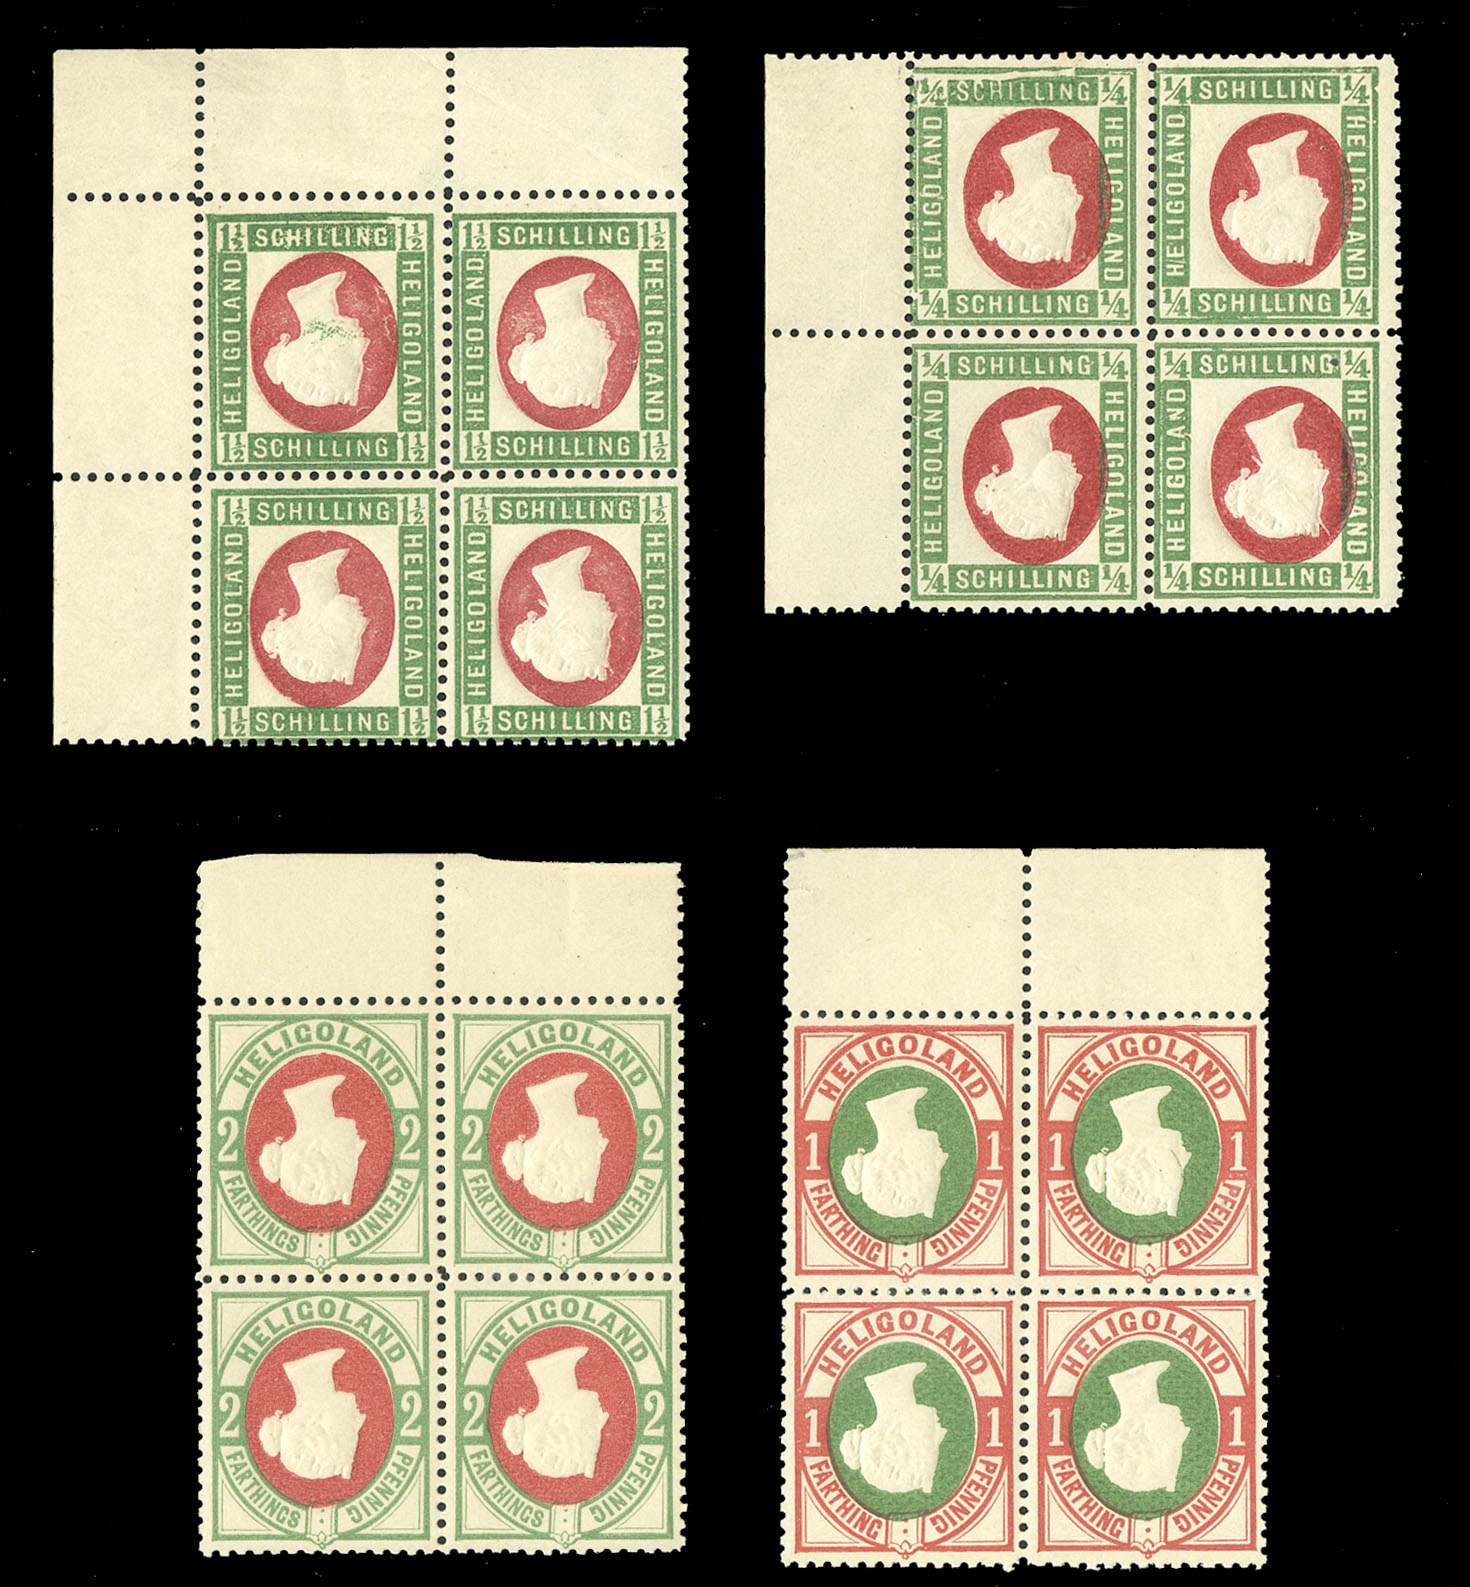 Lot 496 - FRENCH COLONIES Tunisia Air Post  -  Cherrystone Auctions U.S. & Worldwide Stamps & Postal History